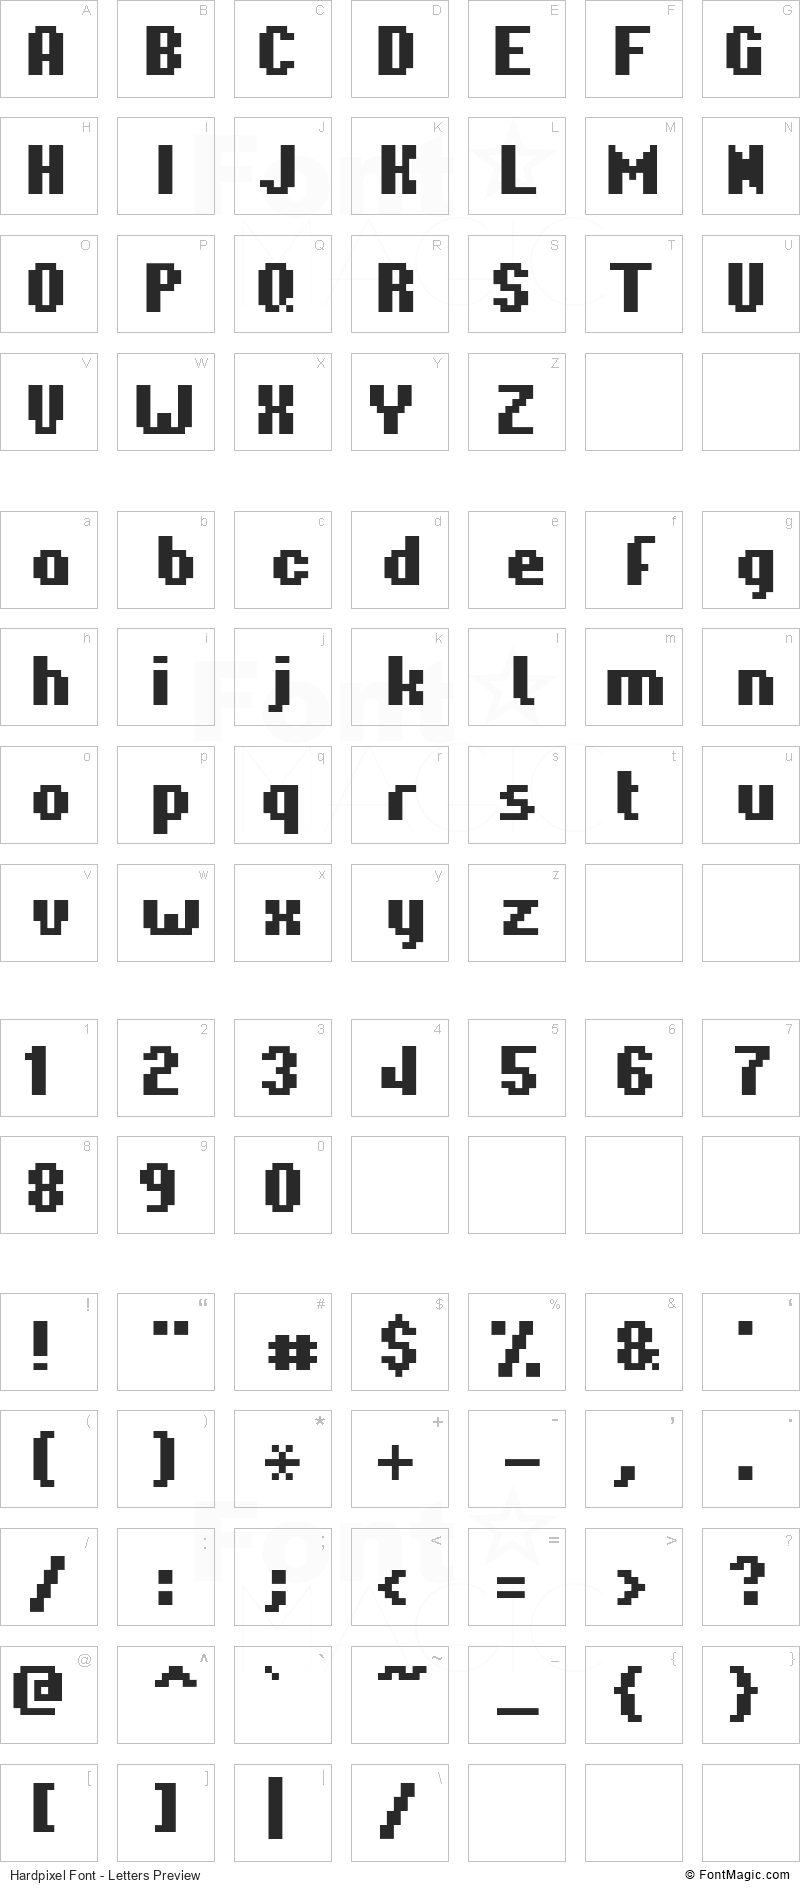 Hardpixel Font - All Latters Preview Chart